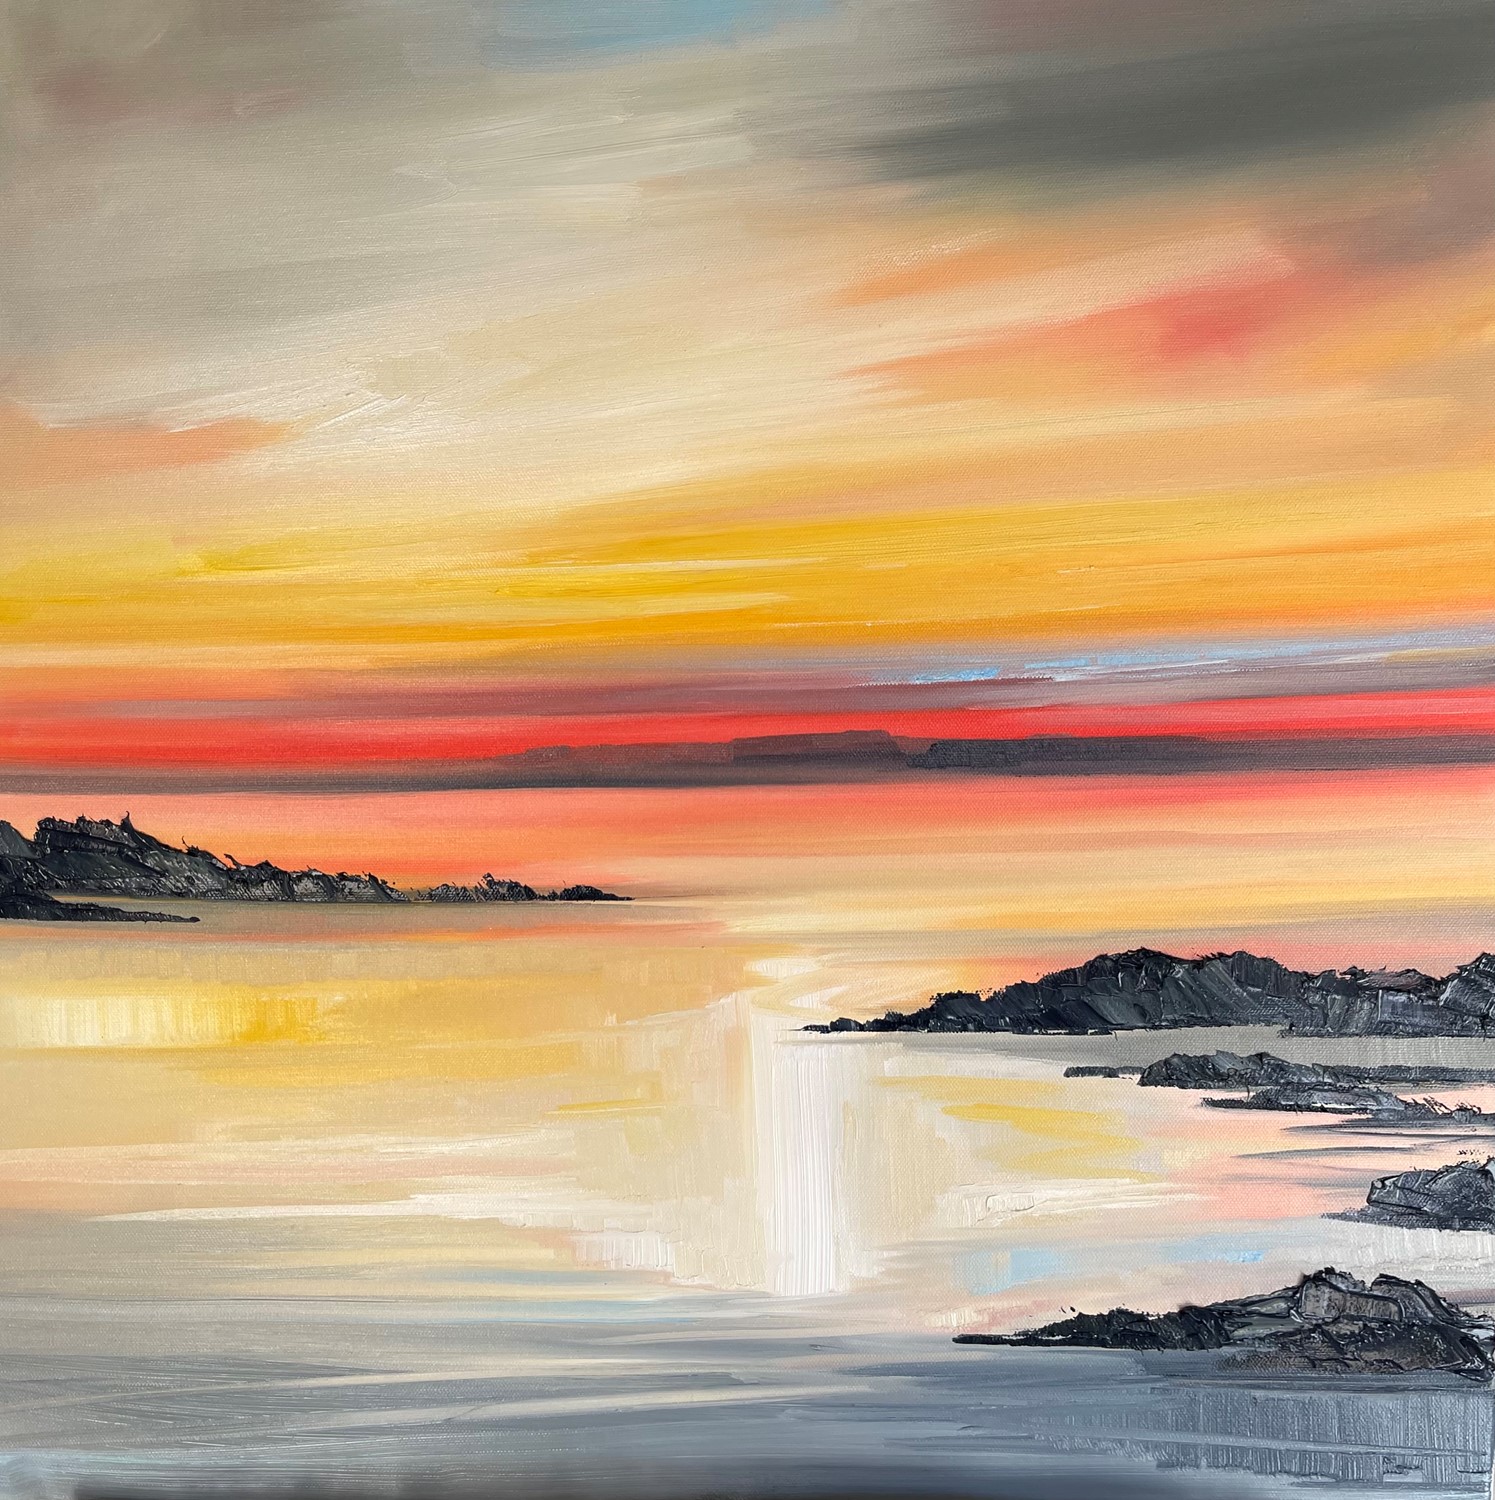 'Looking west at sunset' by artist Rosanne Barr